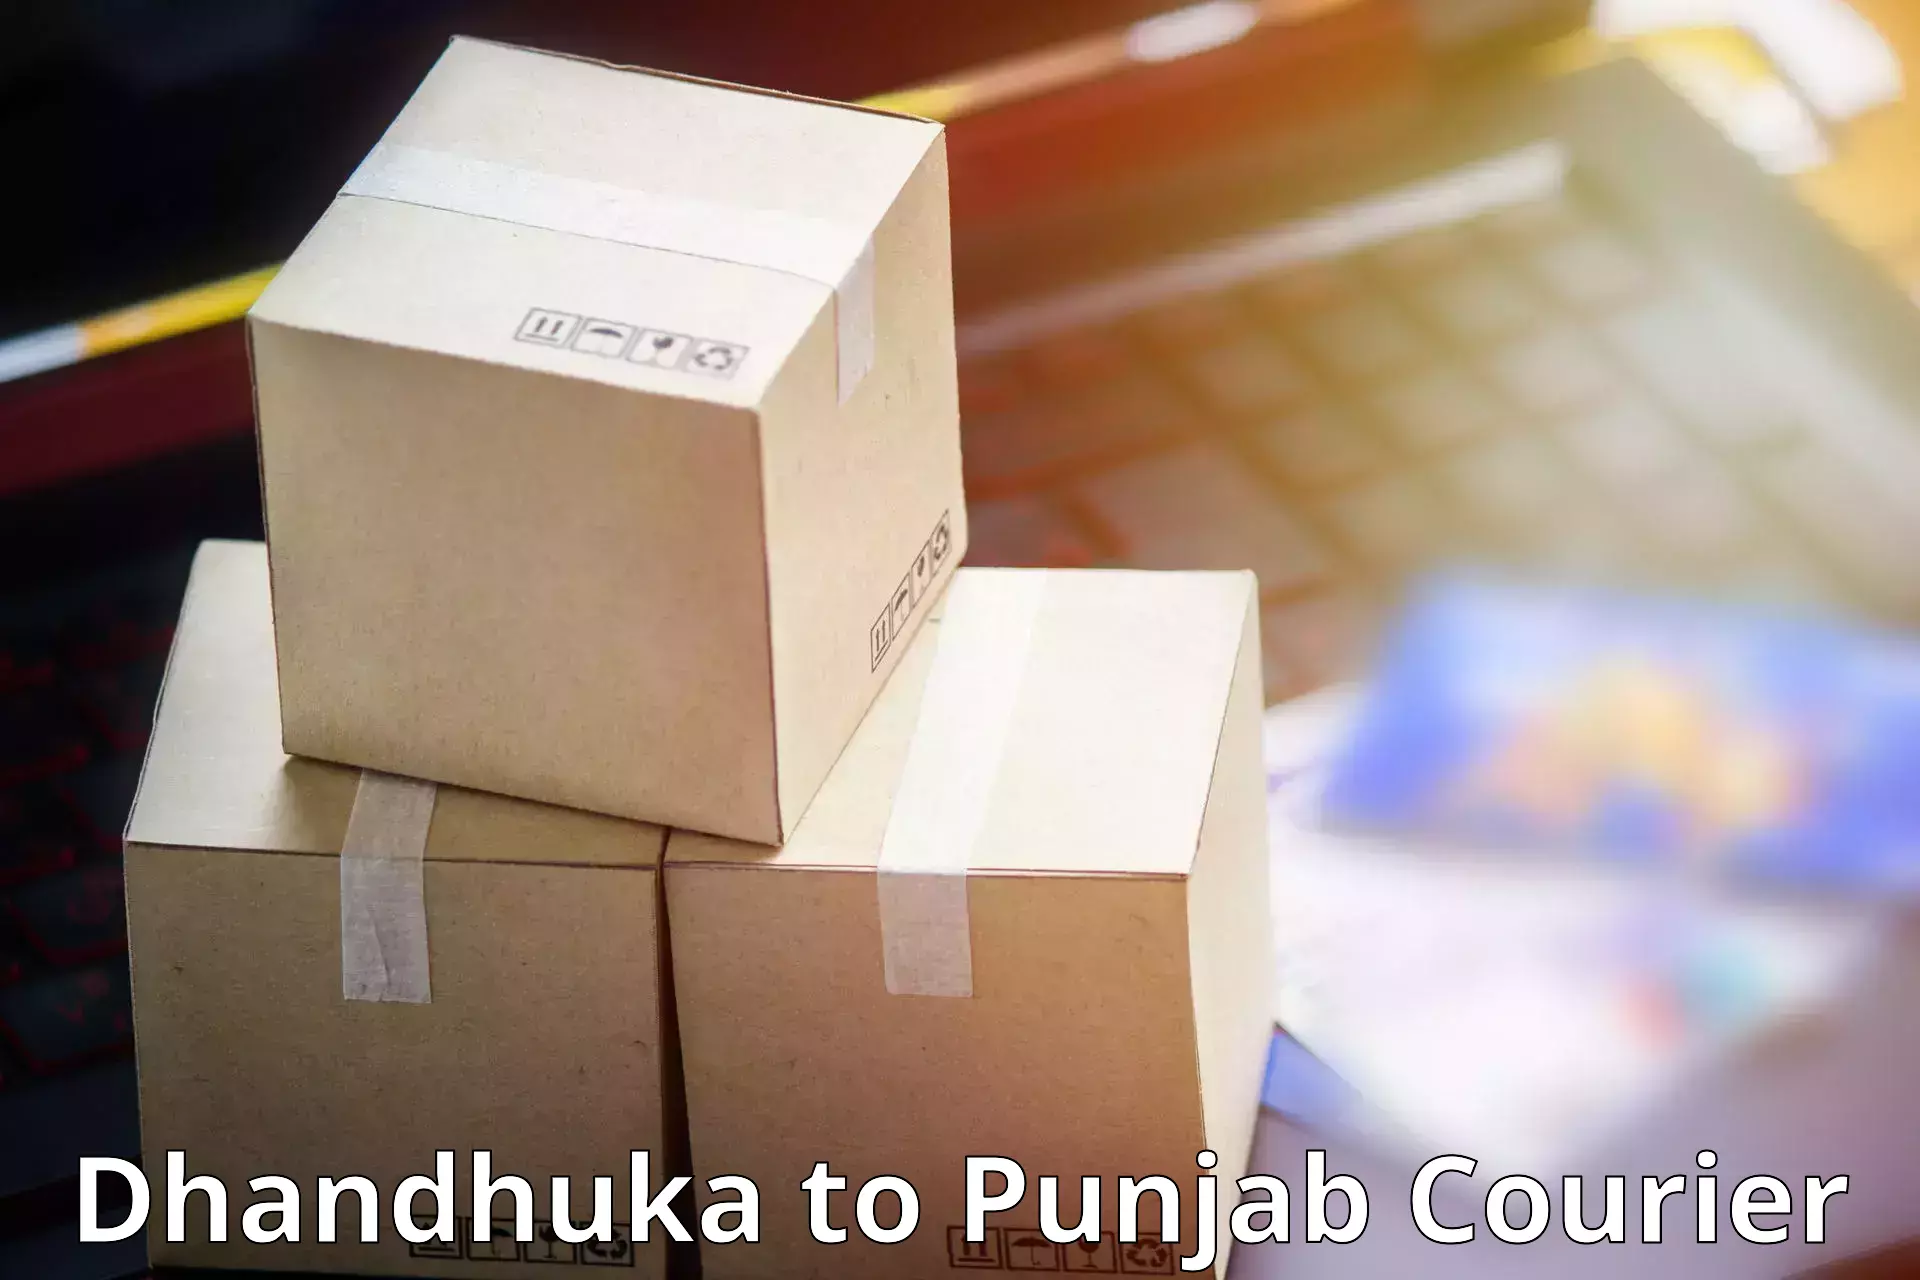 Nationwide delivery network Dhandhuka to Pathankot